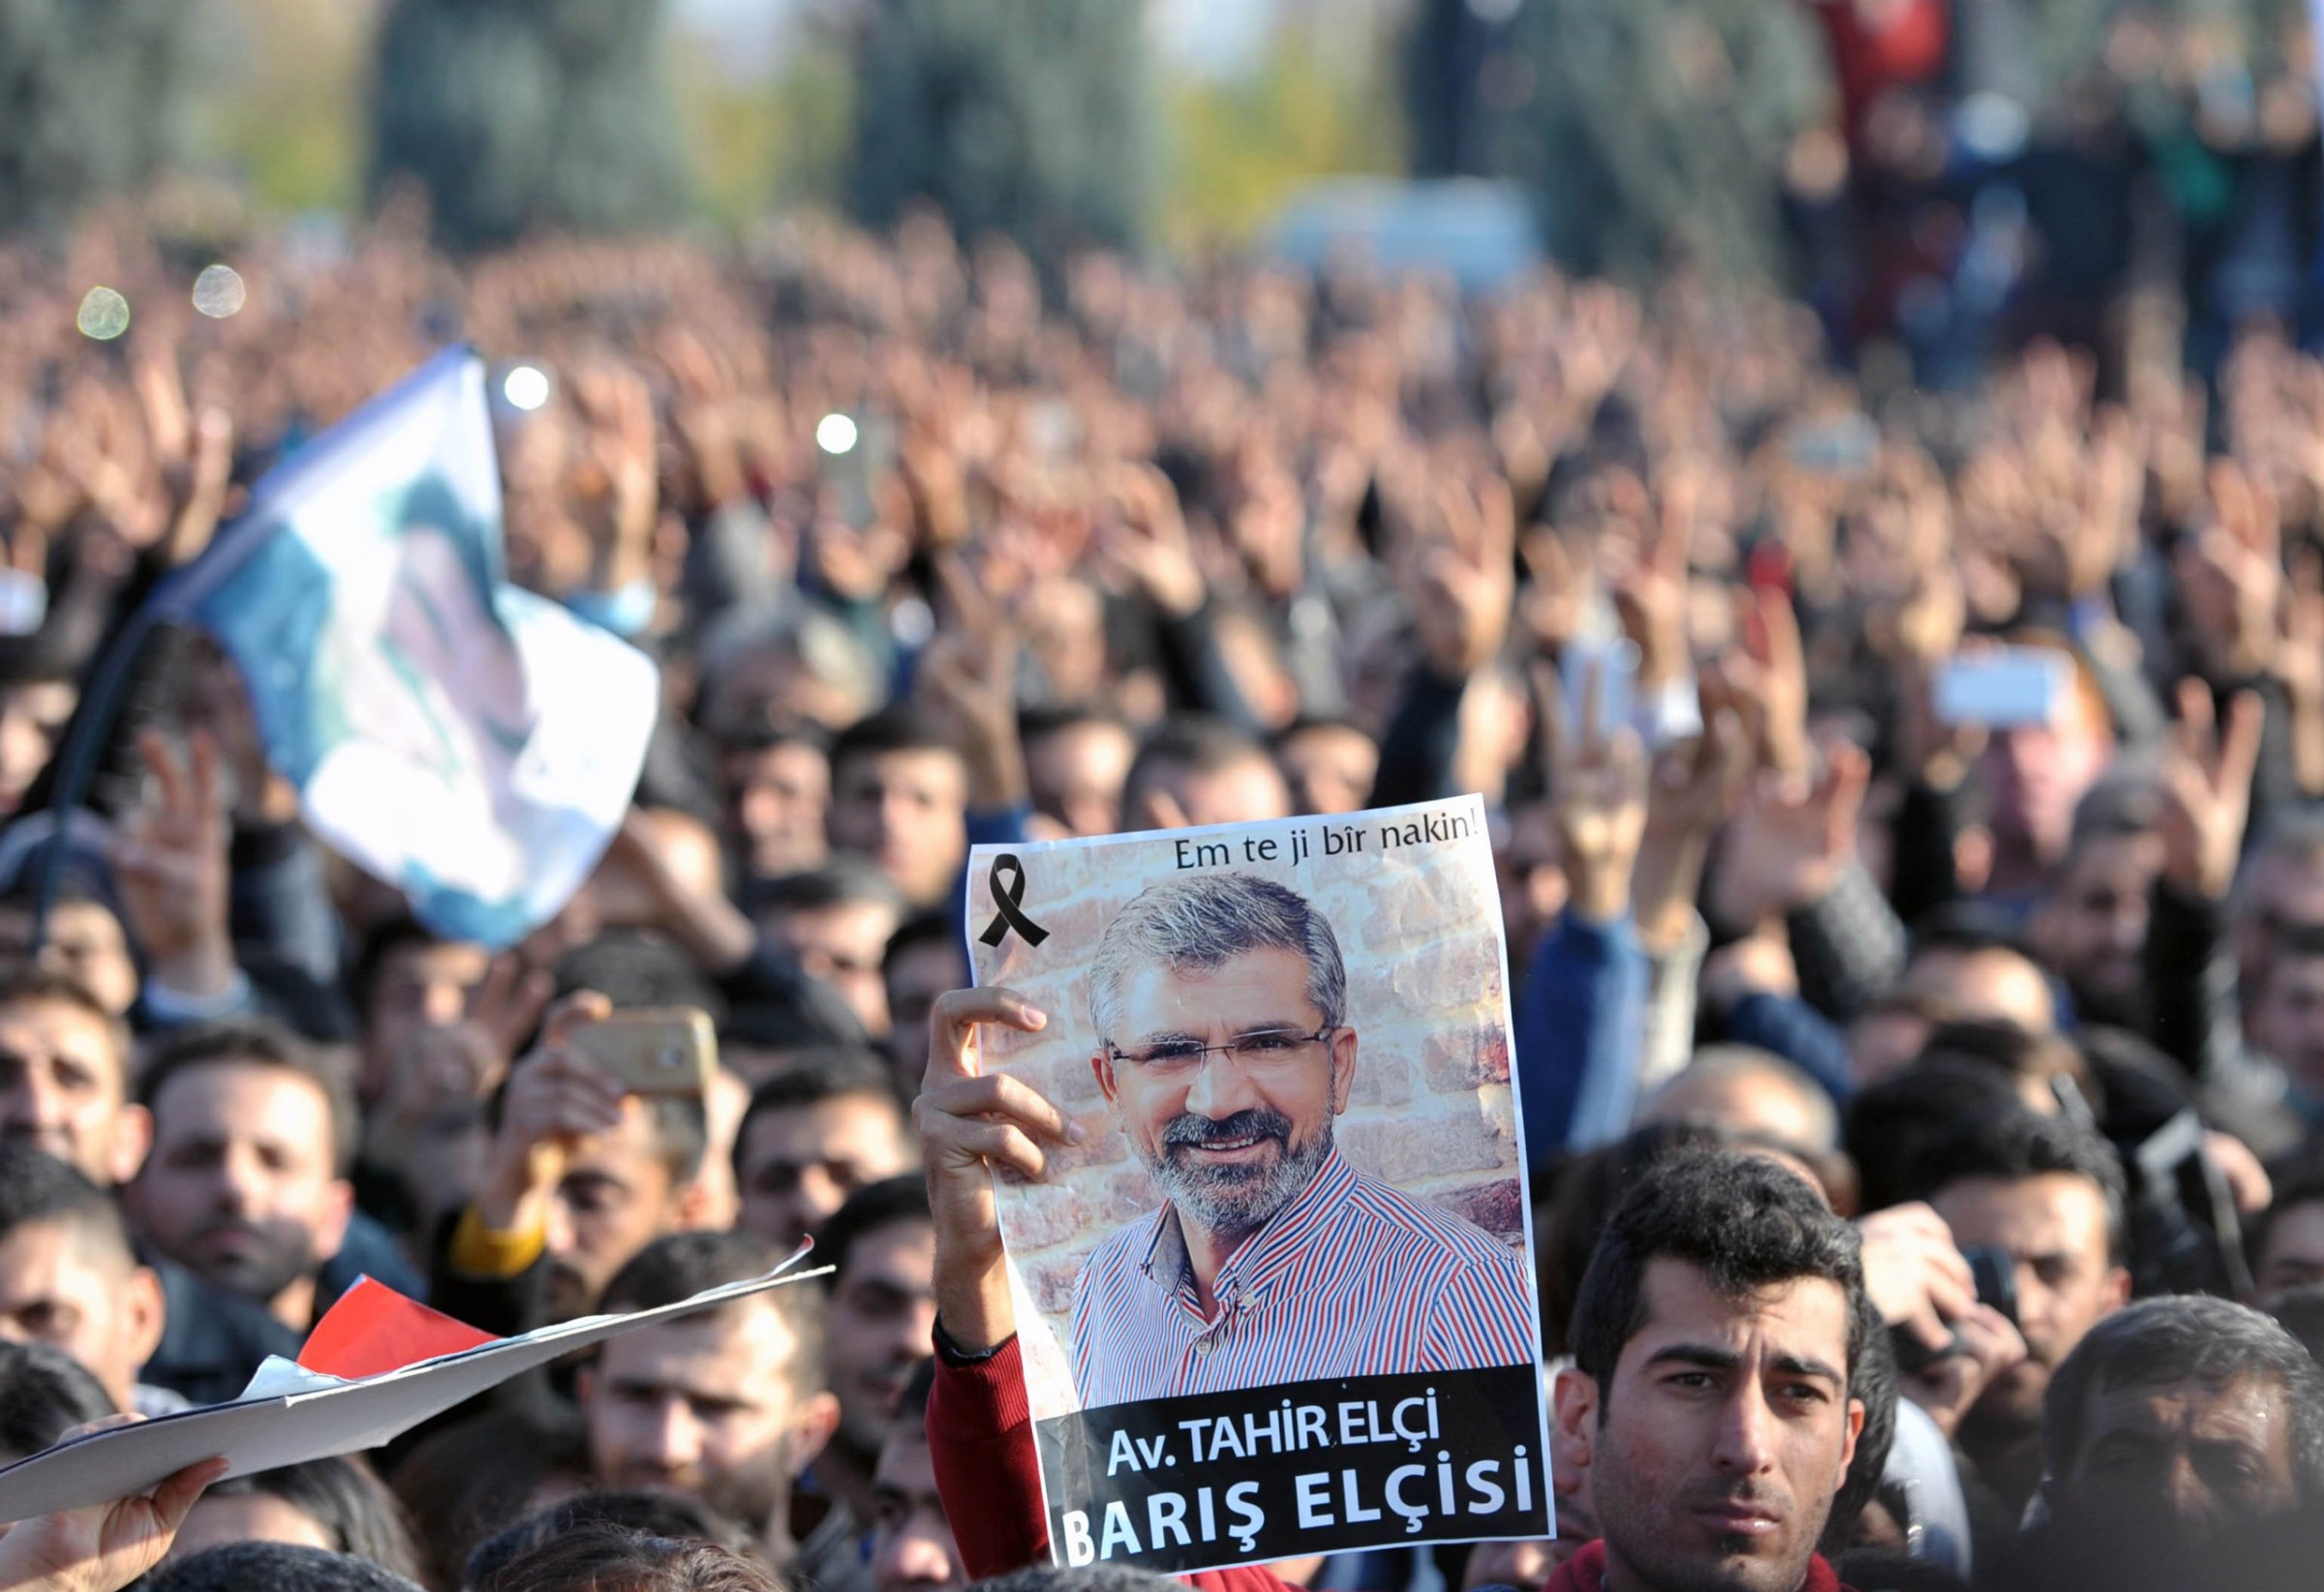 Image #: 41174158 (151129)-- DIARBAKIR, Nov. 29, 2015 (Xinhua) -- A man holds a portrait of Tahir Elci during a mourning ceremony for Tahir Elci, head of the Bar Association in Diyarbakir, who was killed on Nov, 28 in Turkey's southeastern Diyarbakir province on Nov. 29, 2015. An unknown gunman opened fire at Tahir Elci's gathering in a press meeting in Diyarbakir on Saturday, killing Elci and one policeman at the scene. (Xinhua/Mert Macit)(azp) XINHUA /LANDOV